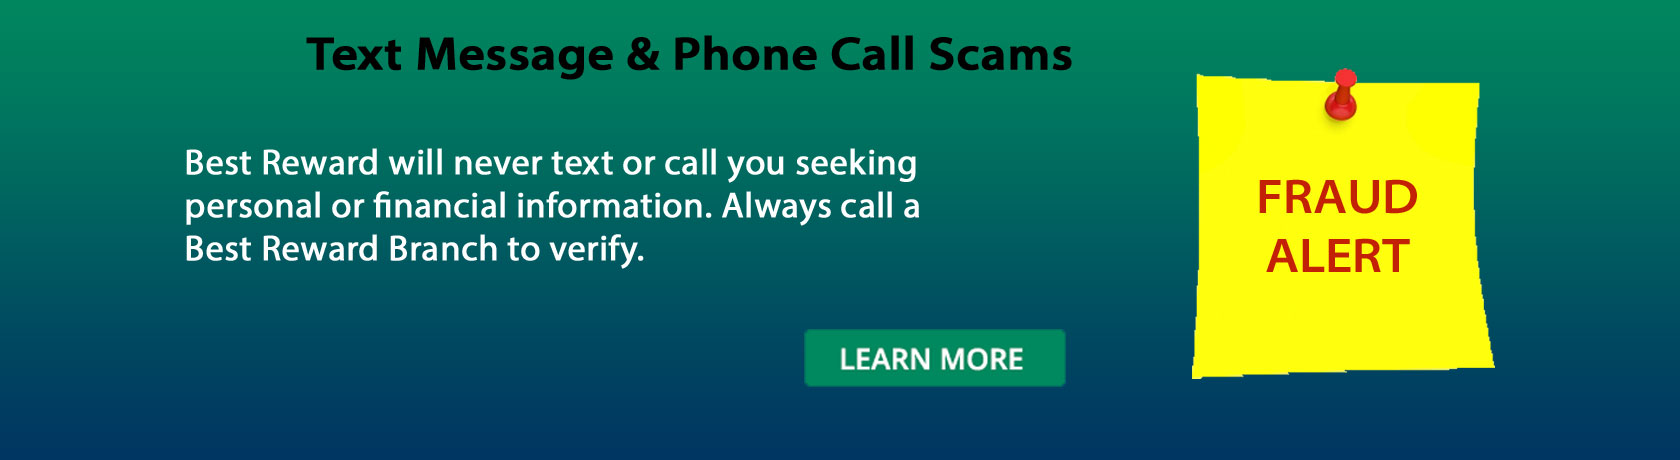 Fraud Alert: Text Message & Phone Call Scams